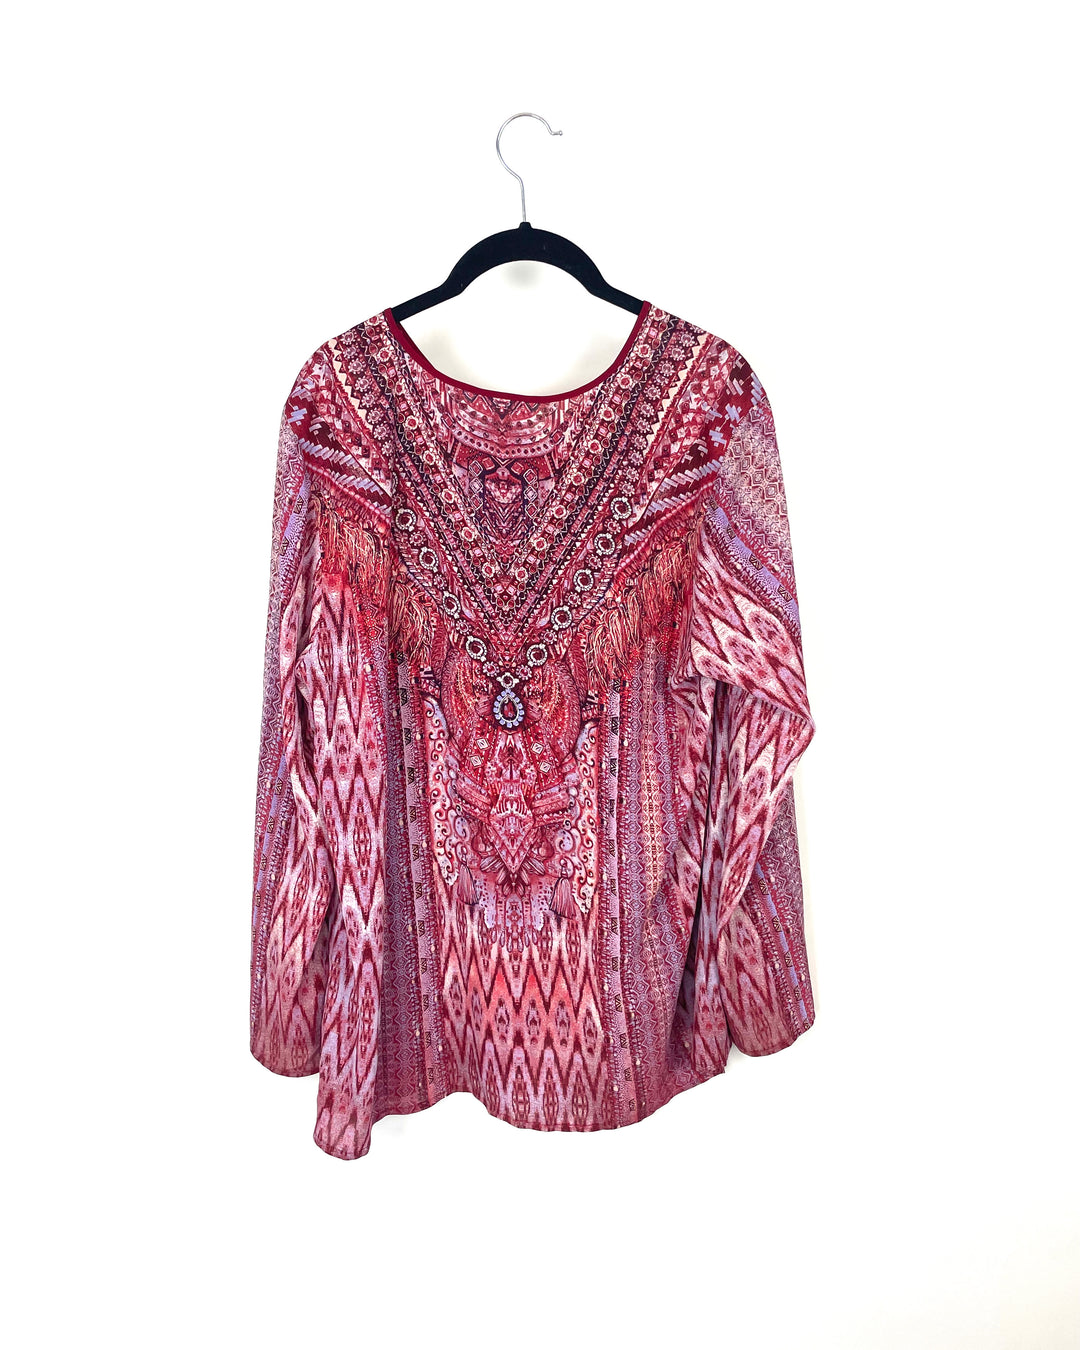 Red Abstract Design Long Sleeve Blouse - Medium/Large